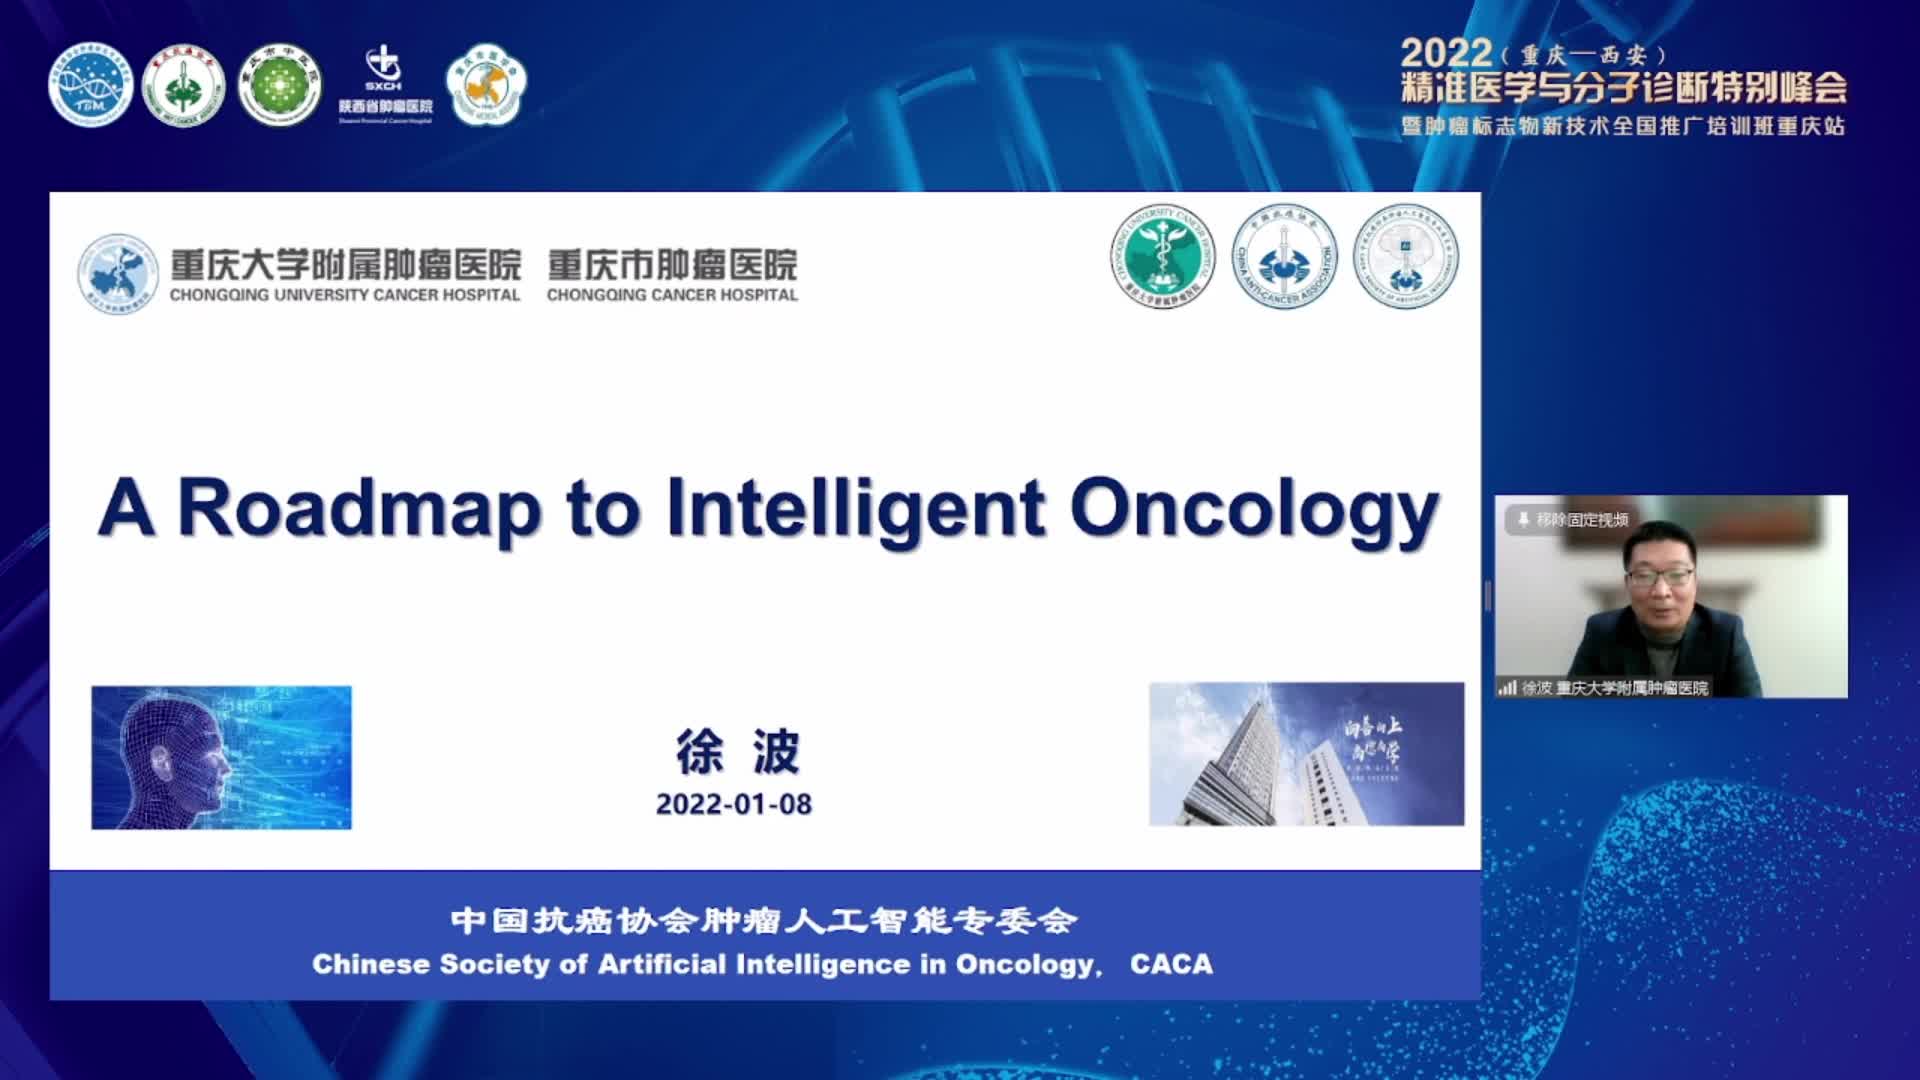 A roadmap to intelligent oncology